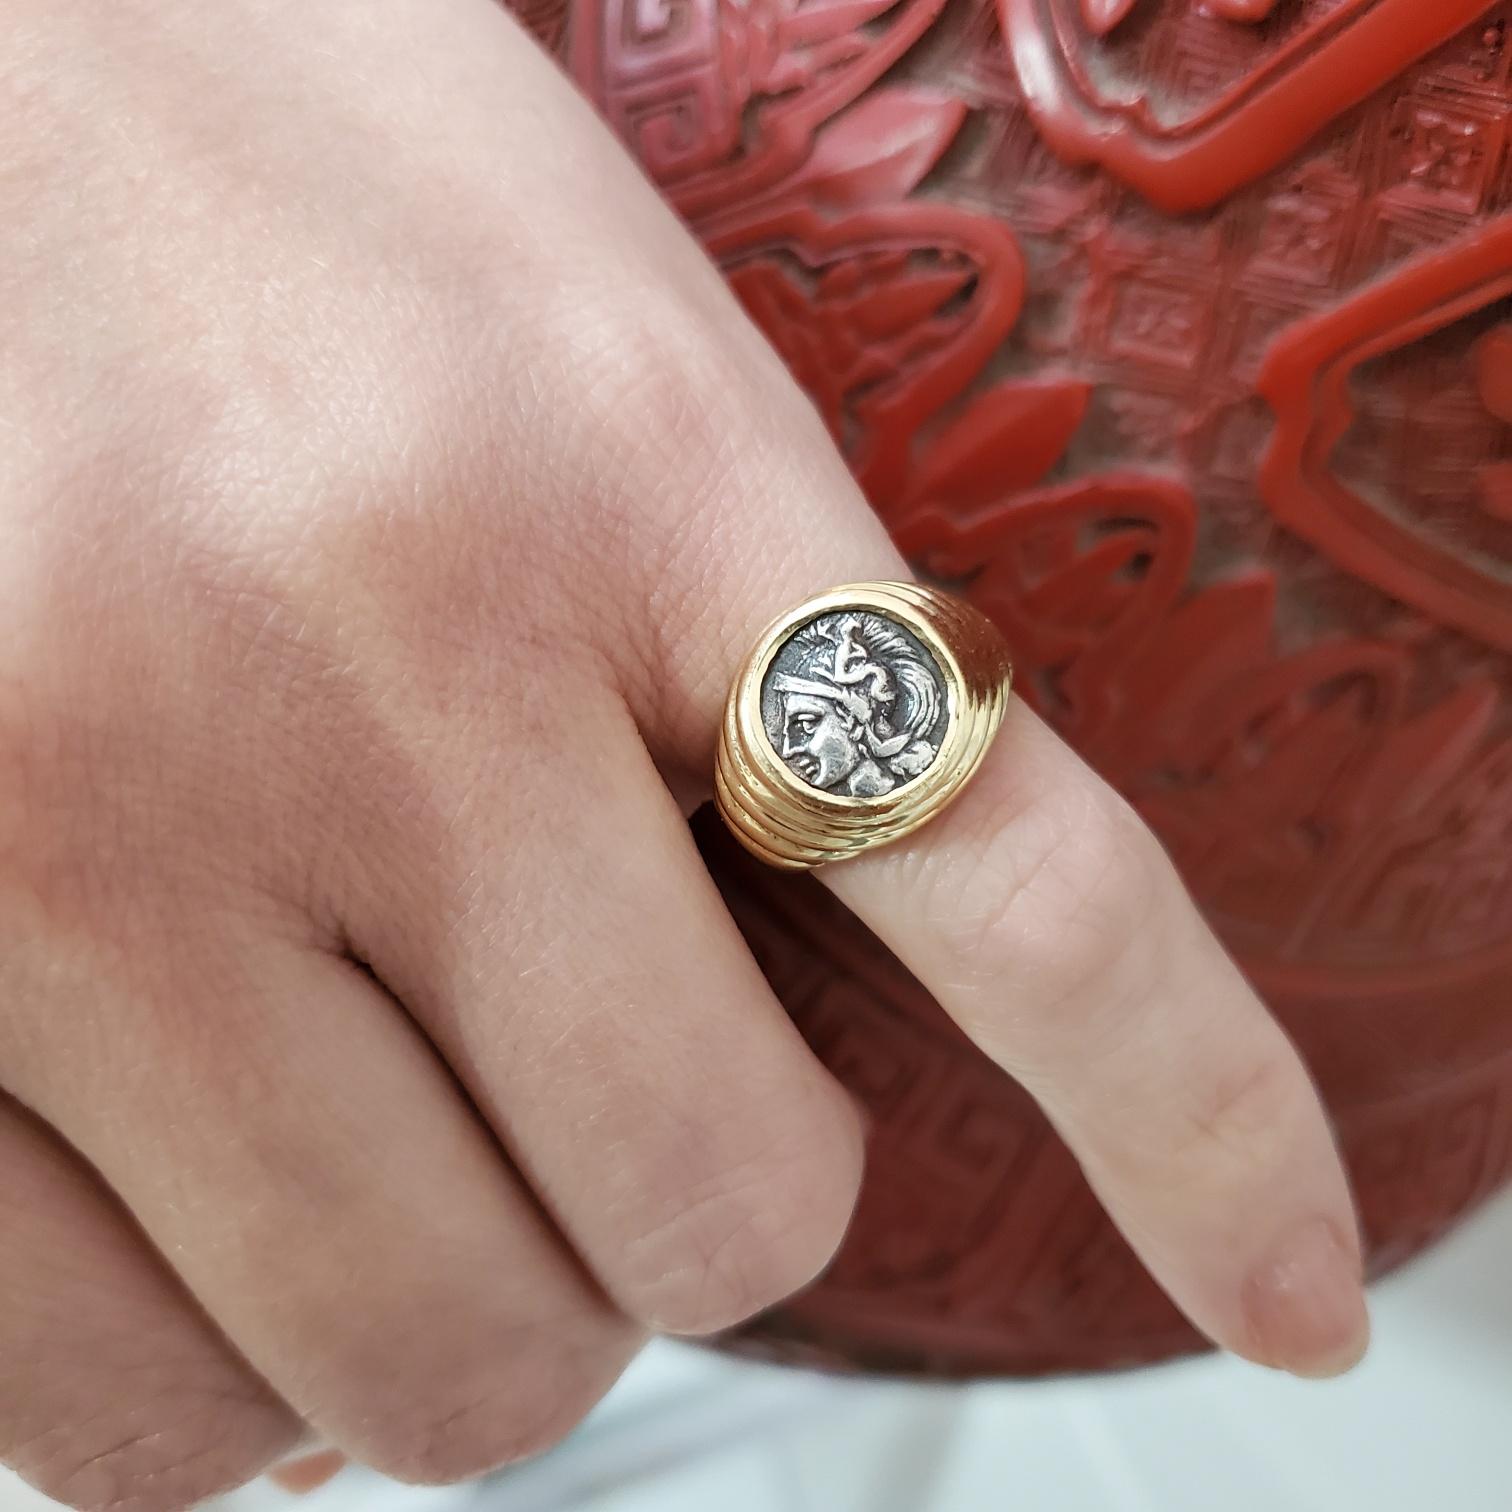 Signet ring with an ancient Greek coin designed by Bvlgari.

Very handsome Moneta signet ring created in Roma Italy by the jewelry house of Bvlgari back in the late 1970's. This ring has been crafted with stepped patterns in solid yellow gold of 18